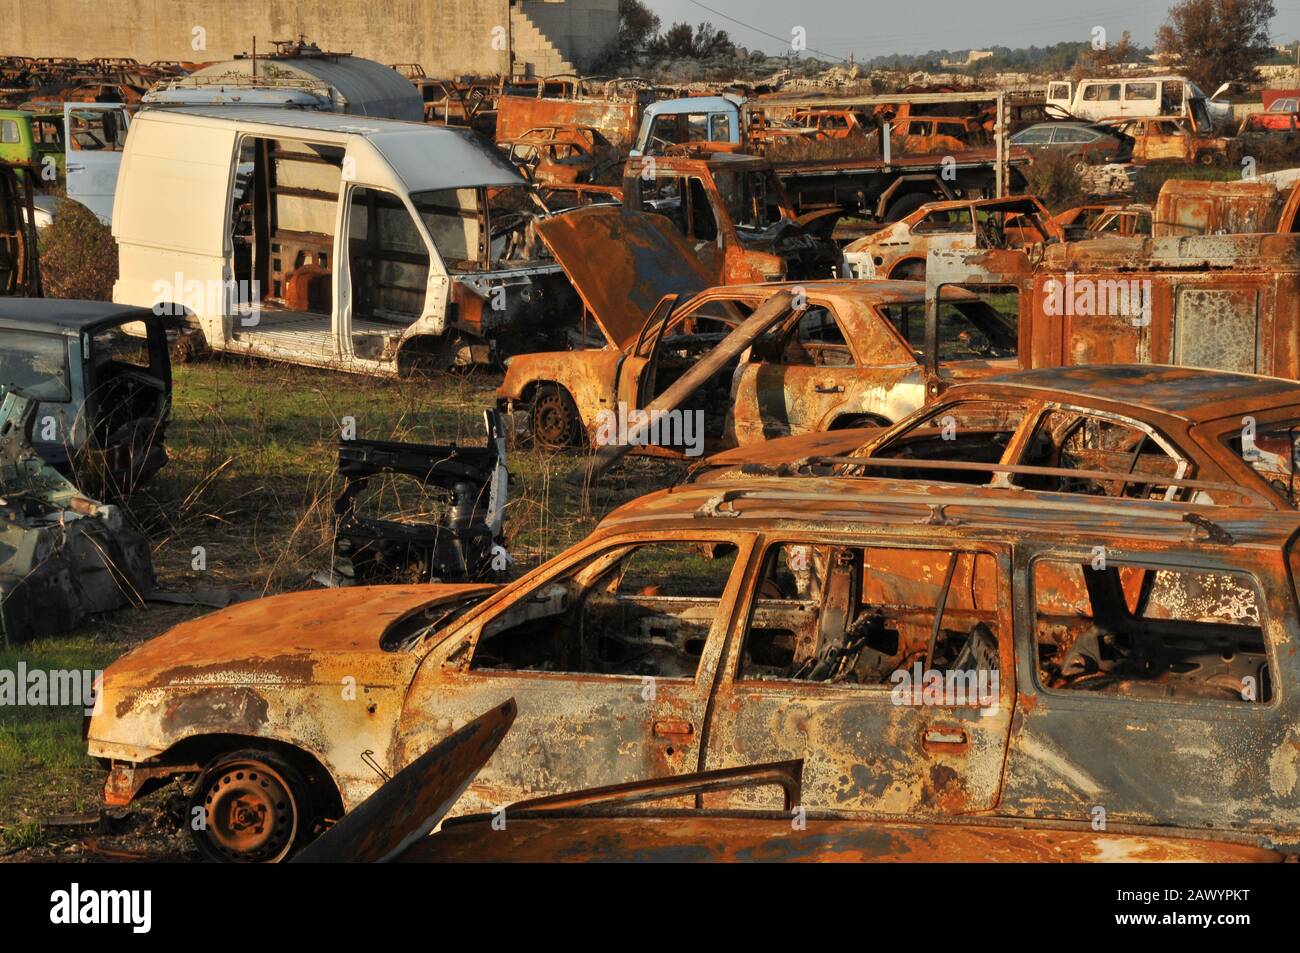 Damp of old rusted cars. Automobile cemetry Stock Photo